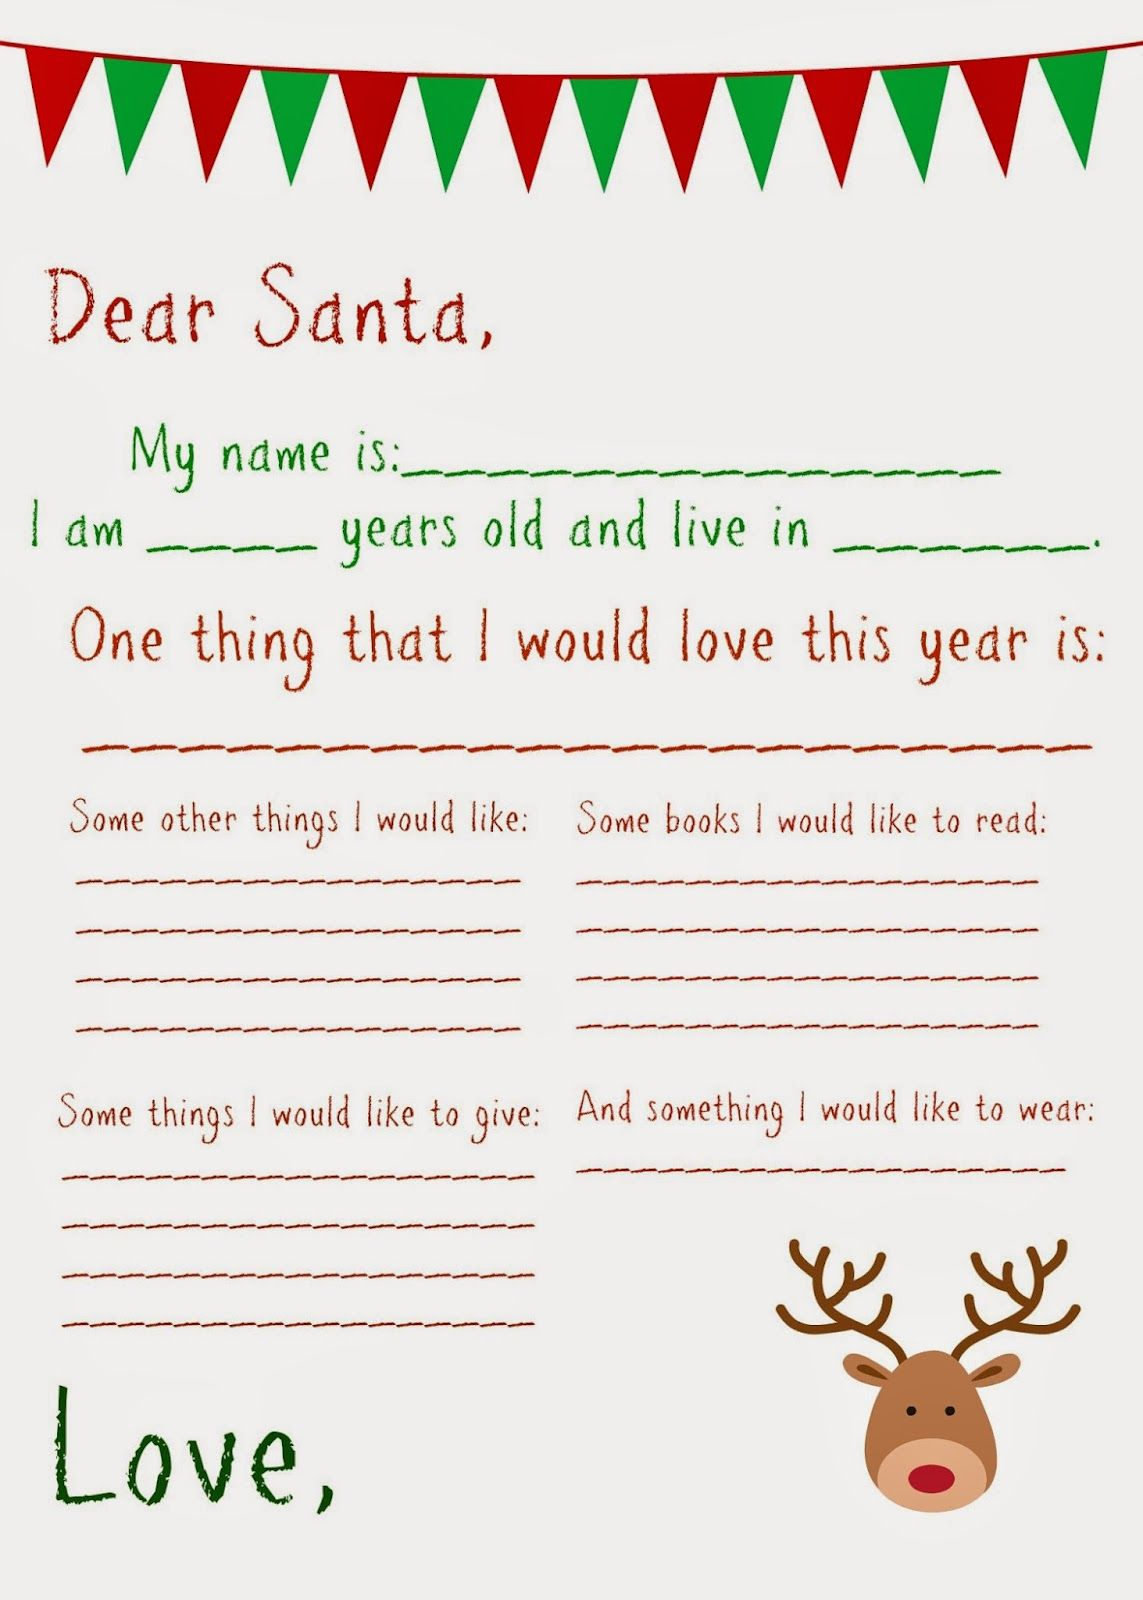 reply-letters-from-santa-with-free-magical-reindeer-dust-child-s-information-create-your-own